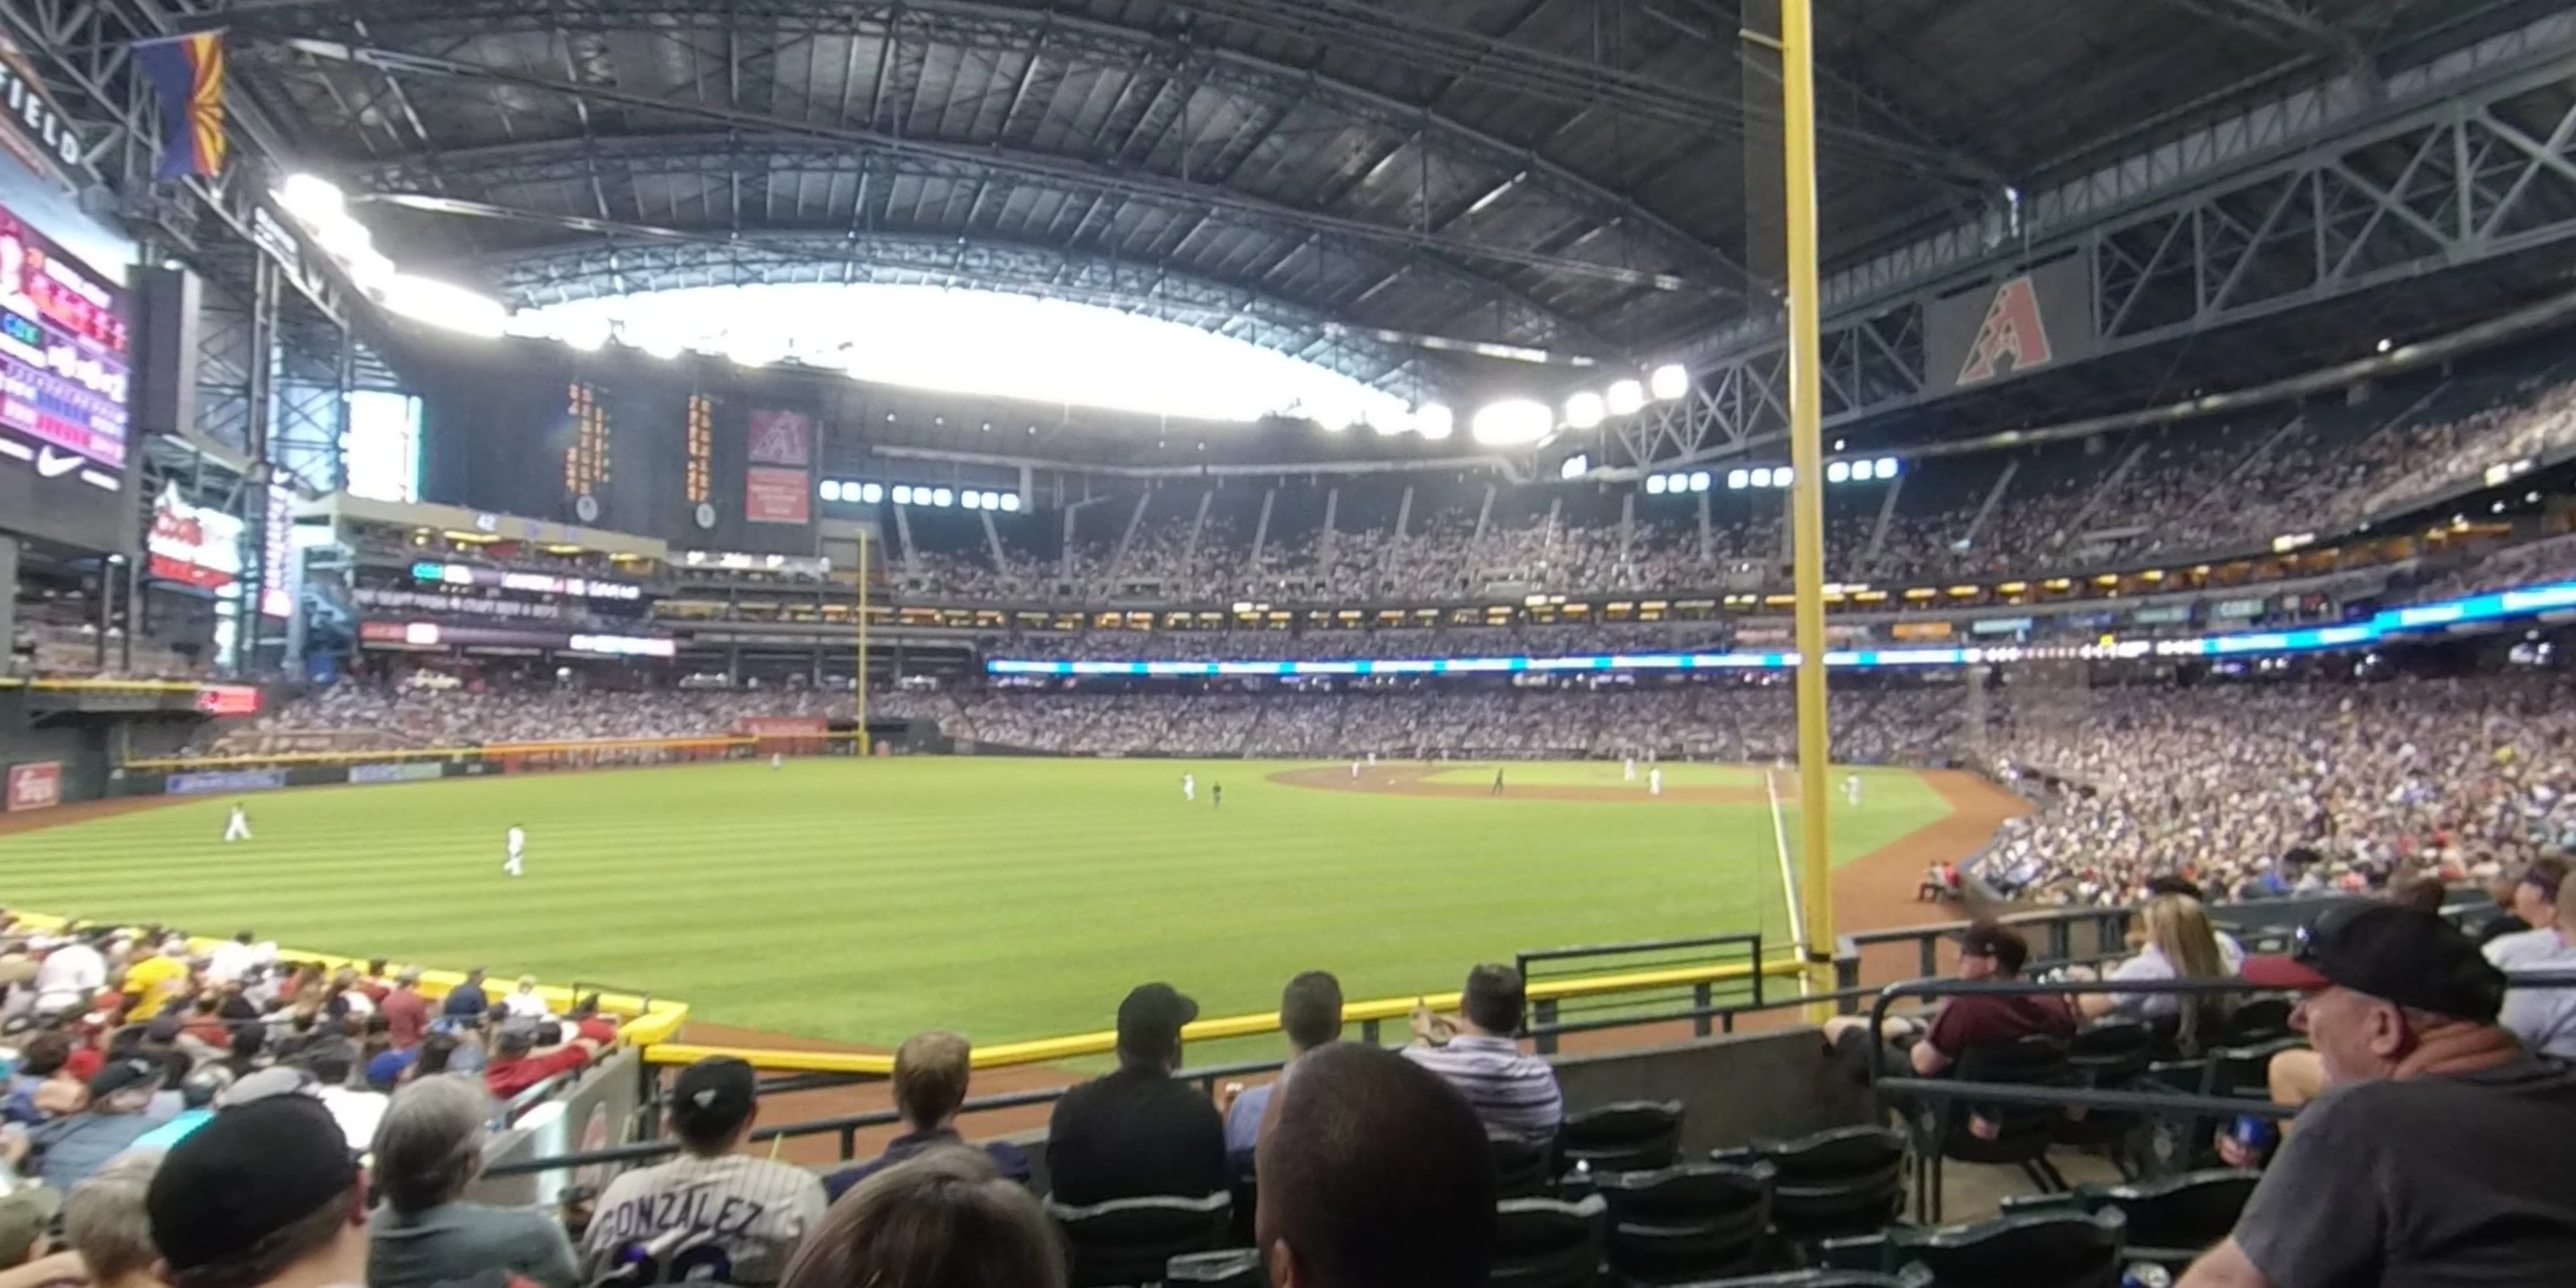 section 137 panoramic seat view  for baseball - chase field